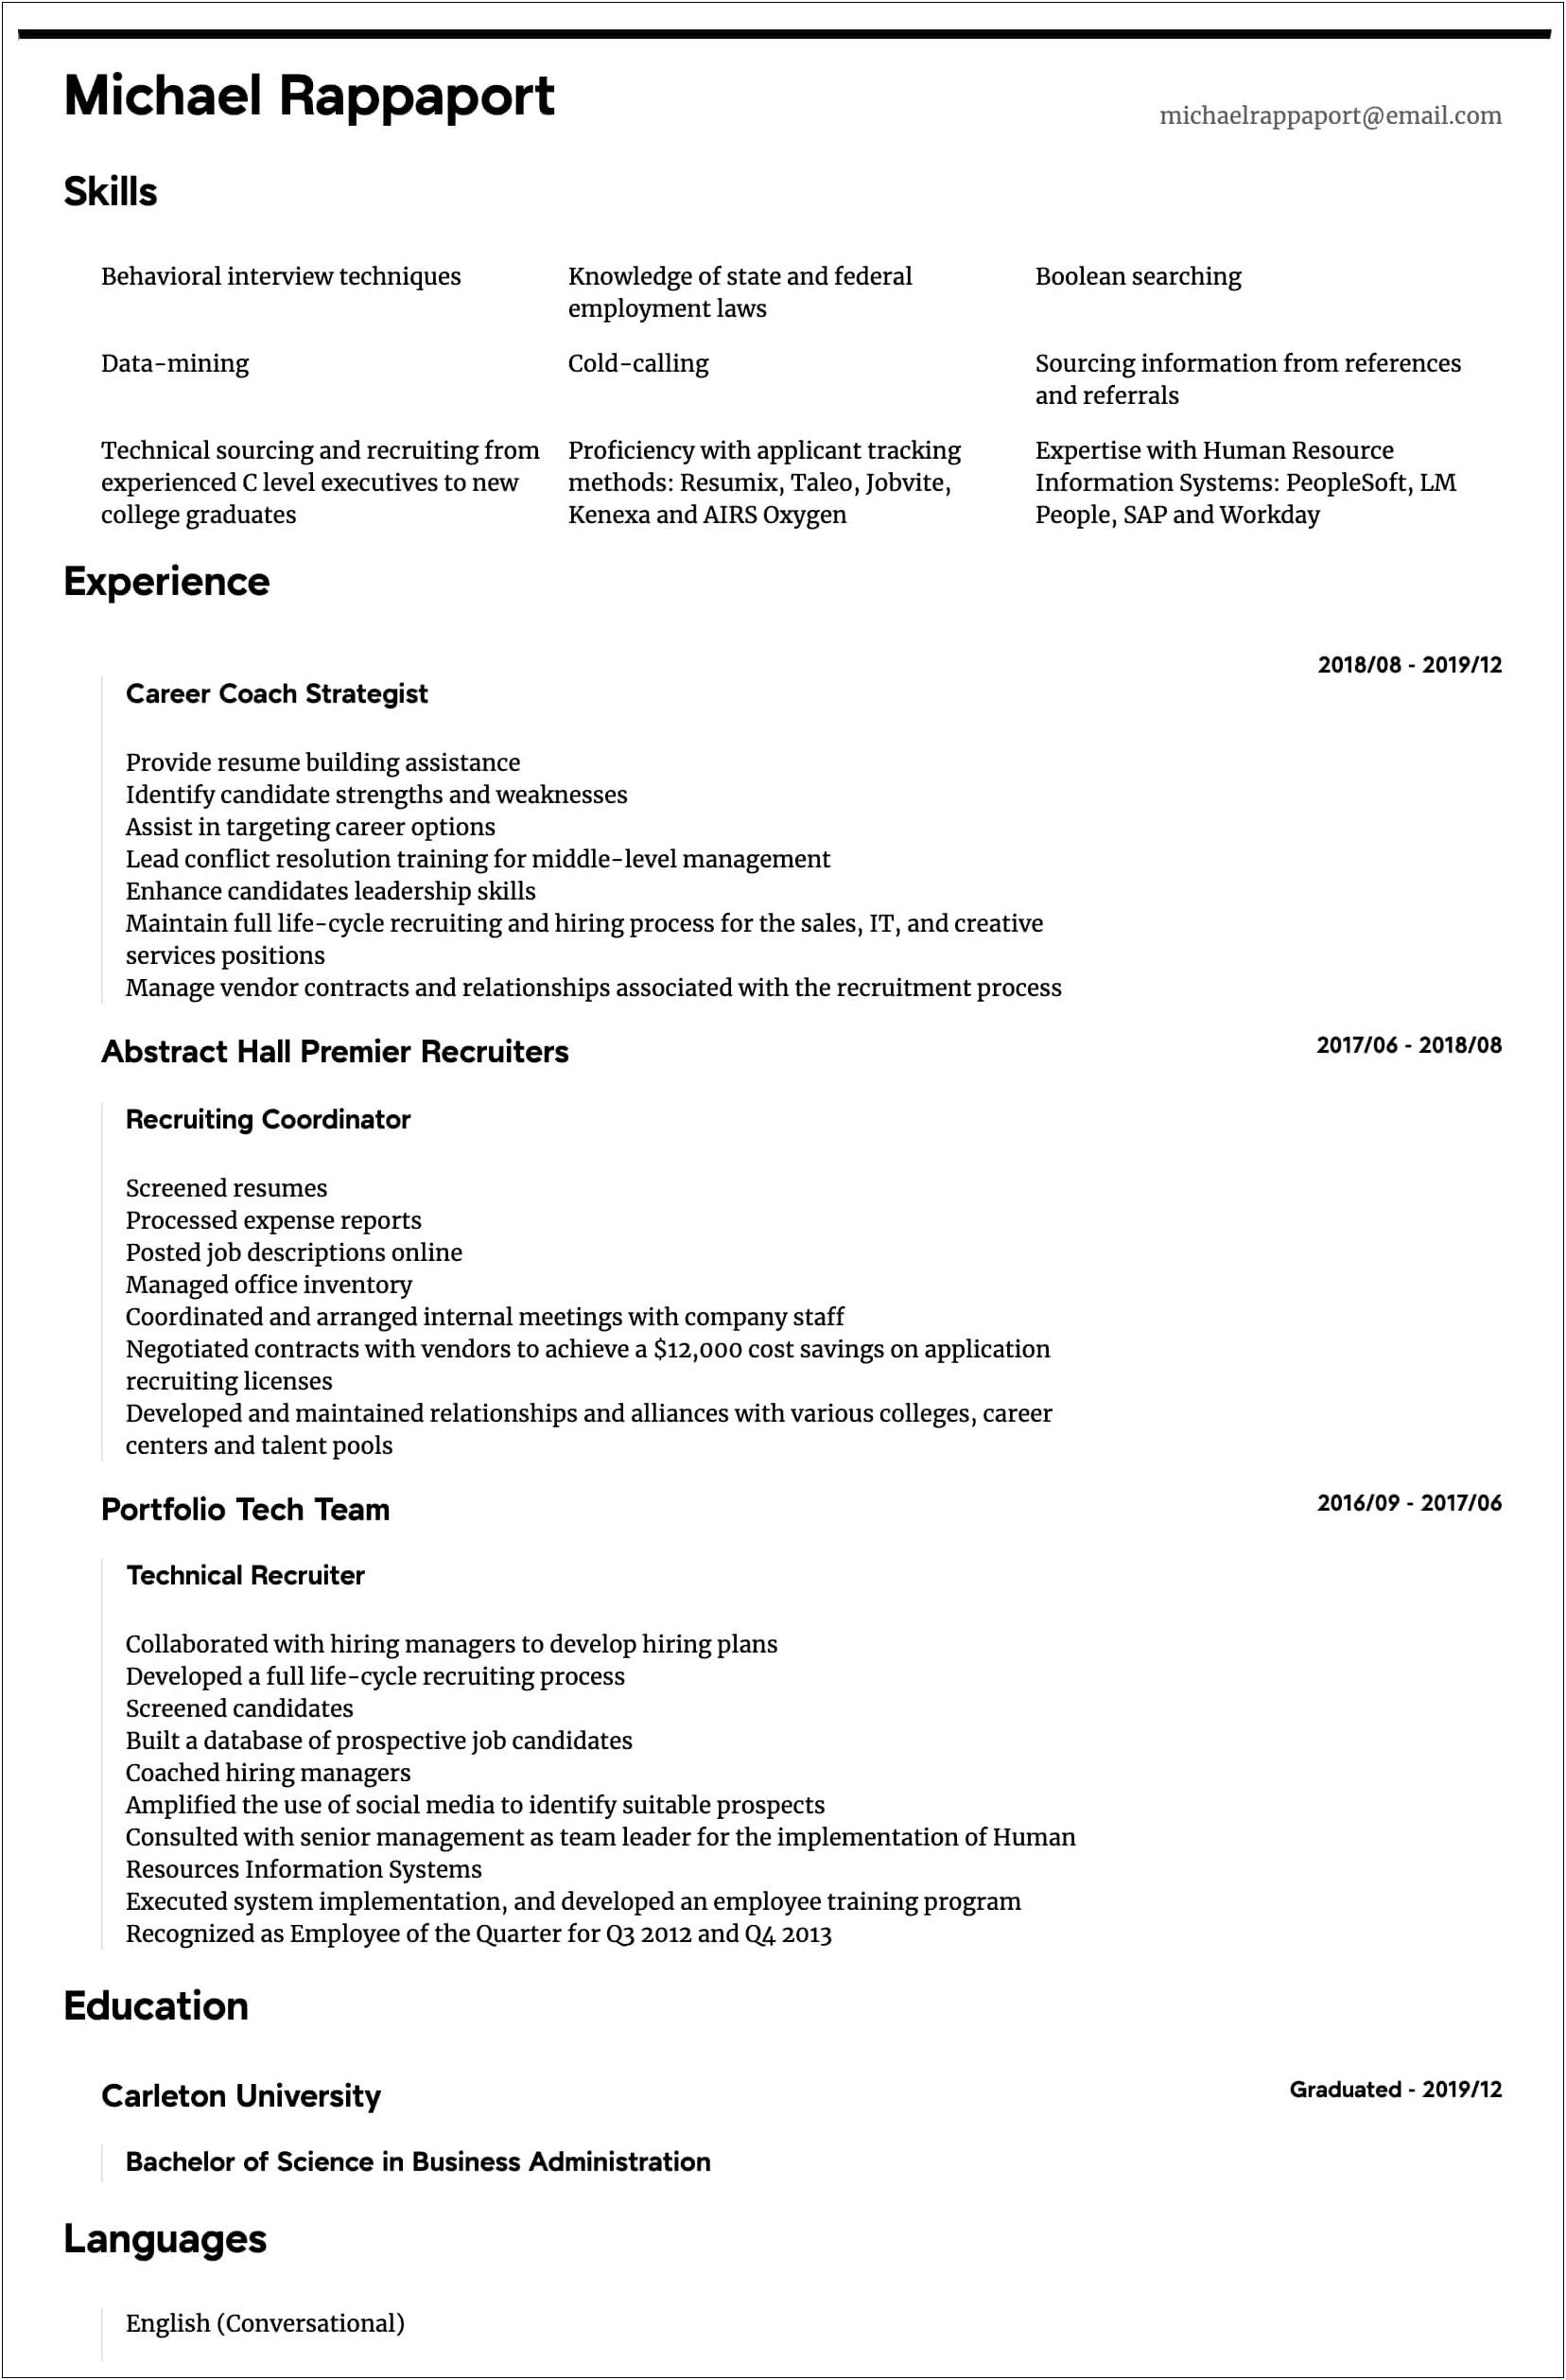 Job Search Resume Sample Images